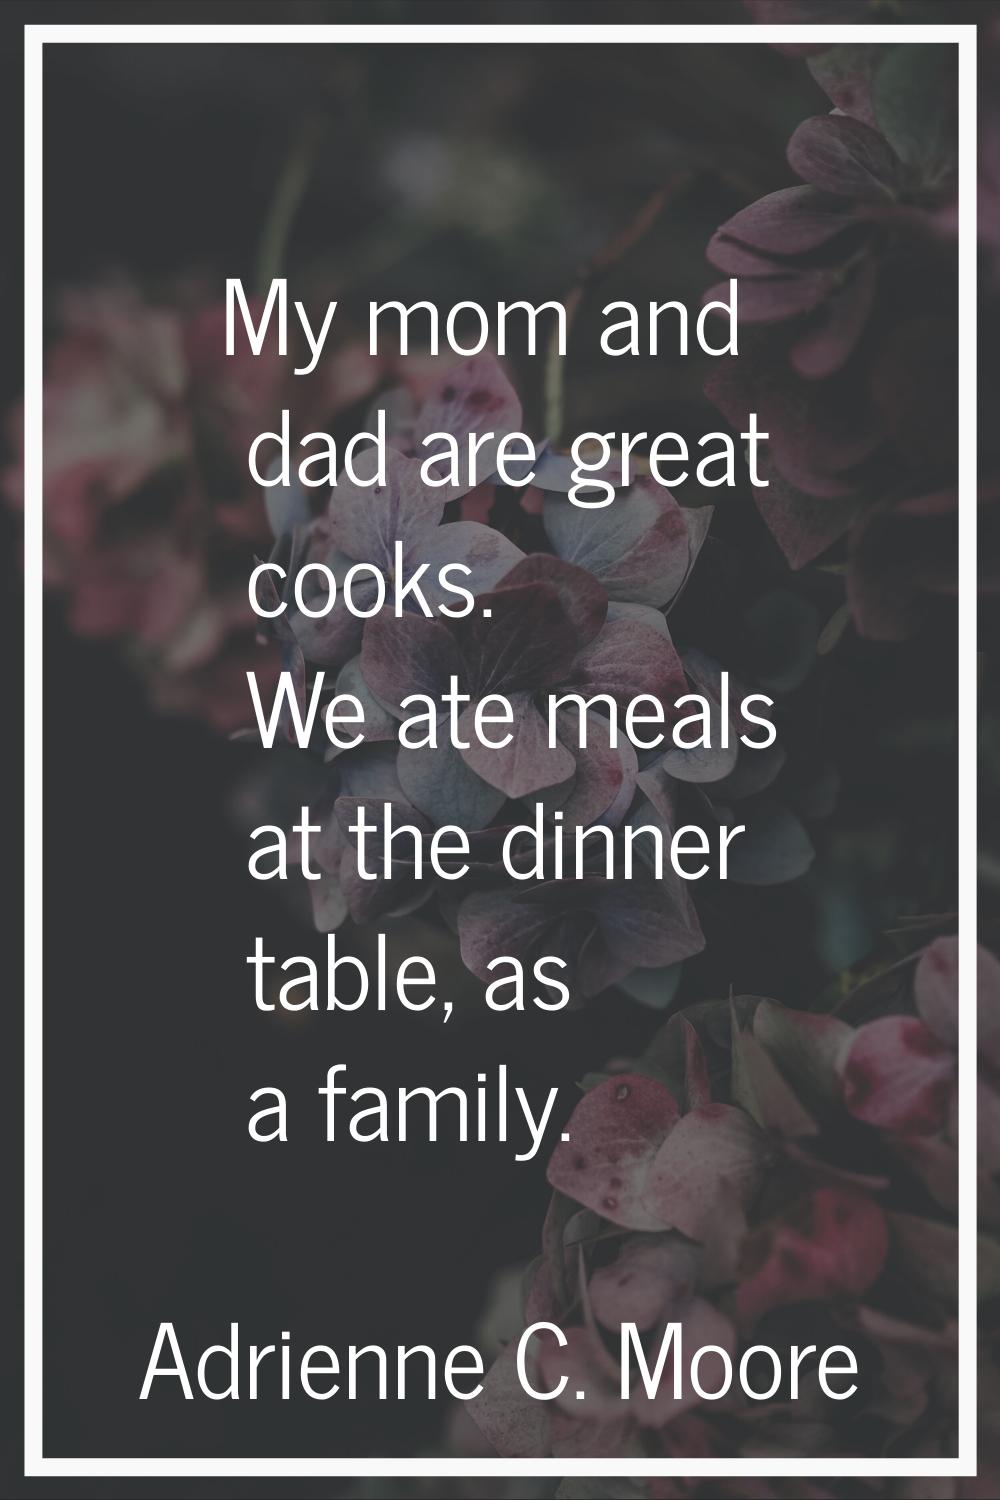 My mom and dad are great cooks. We ate meals at the dinner table, as a family.